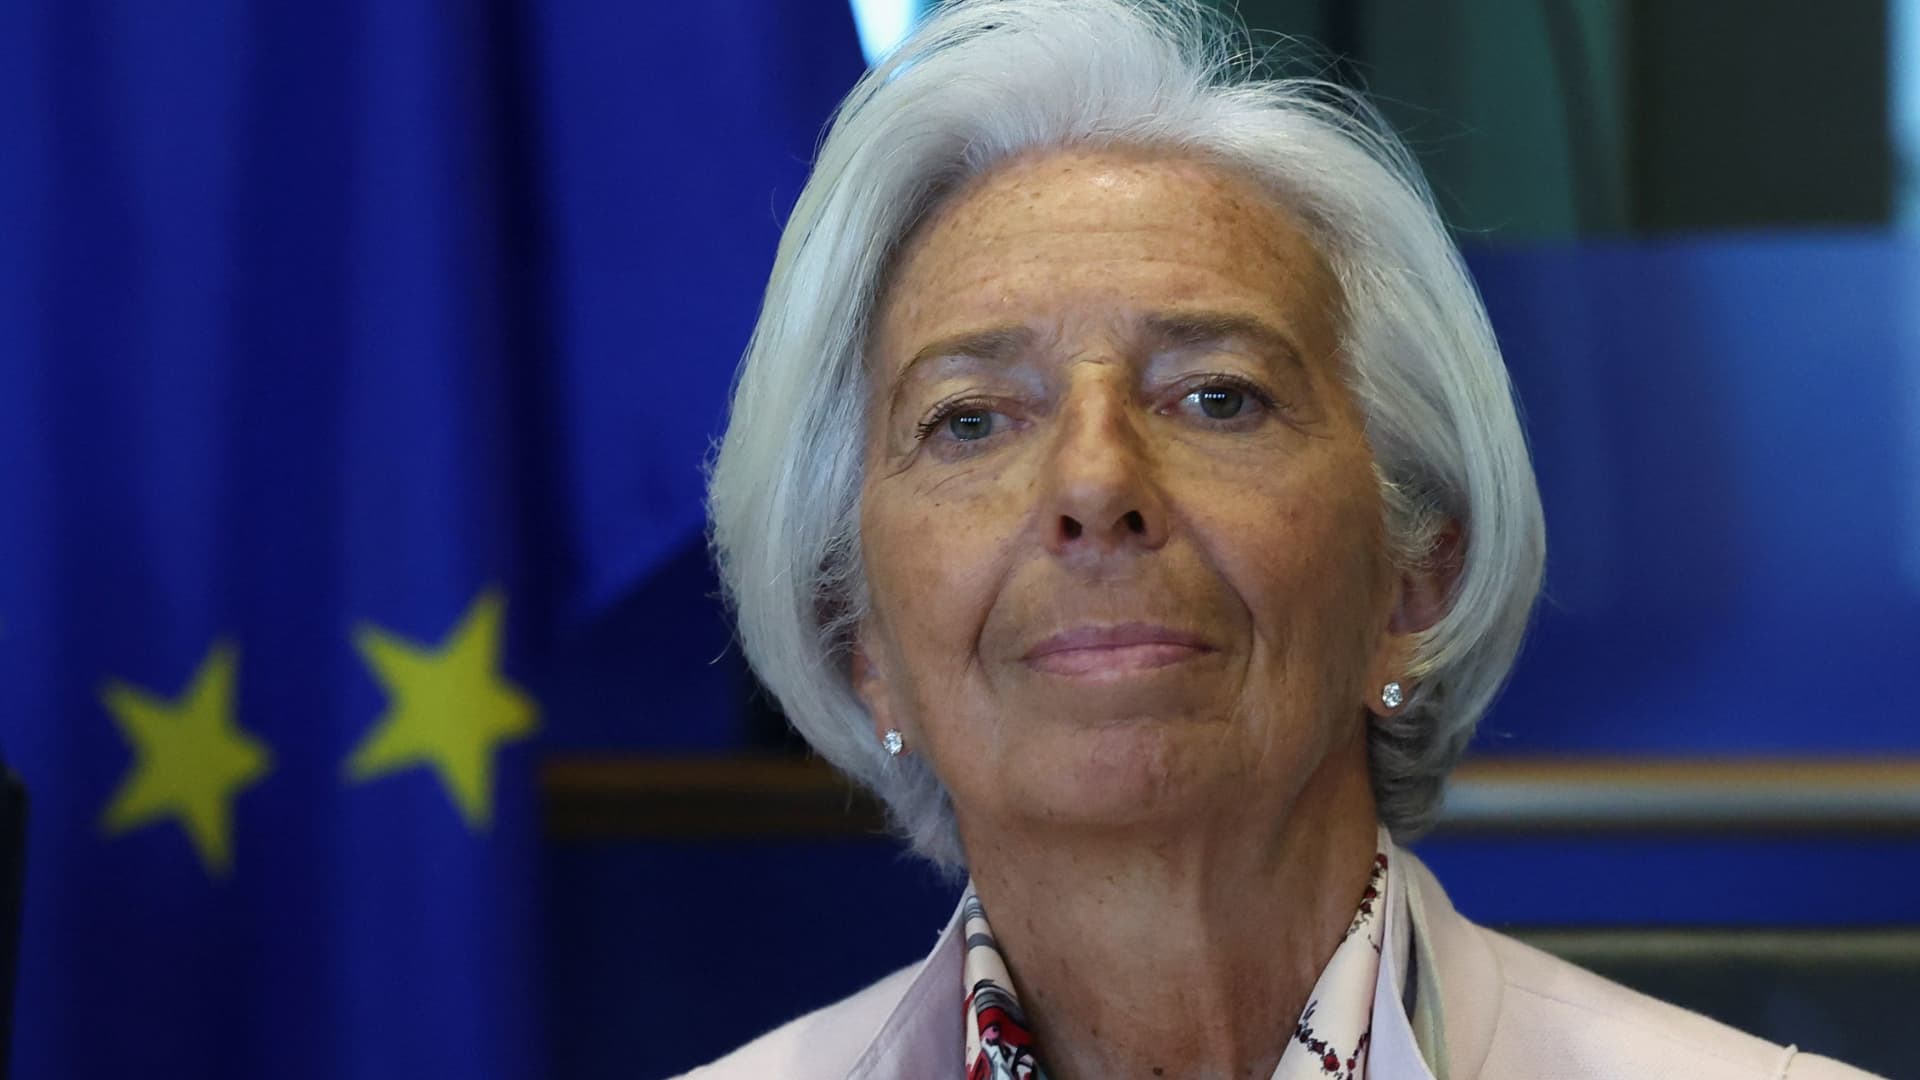 Lagarde says she’s proud to lead ECB after scathing staff survey